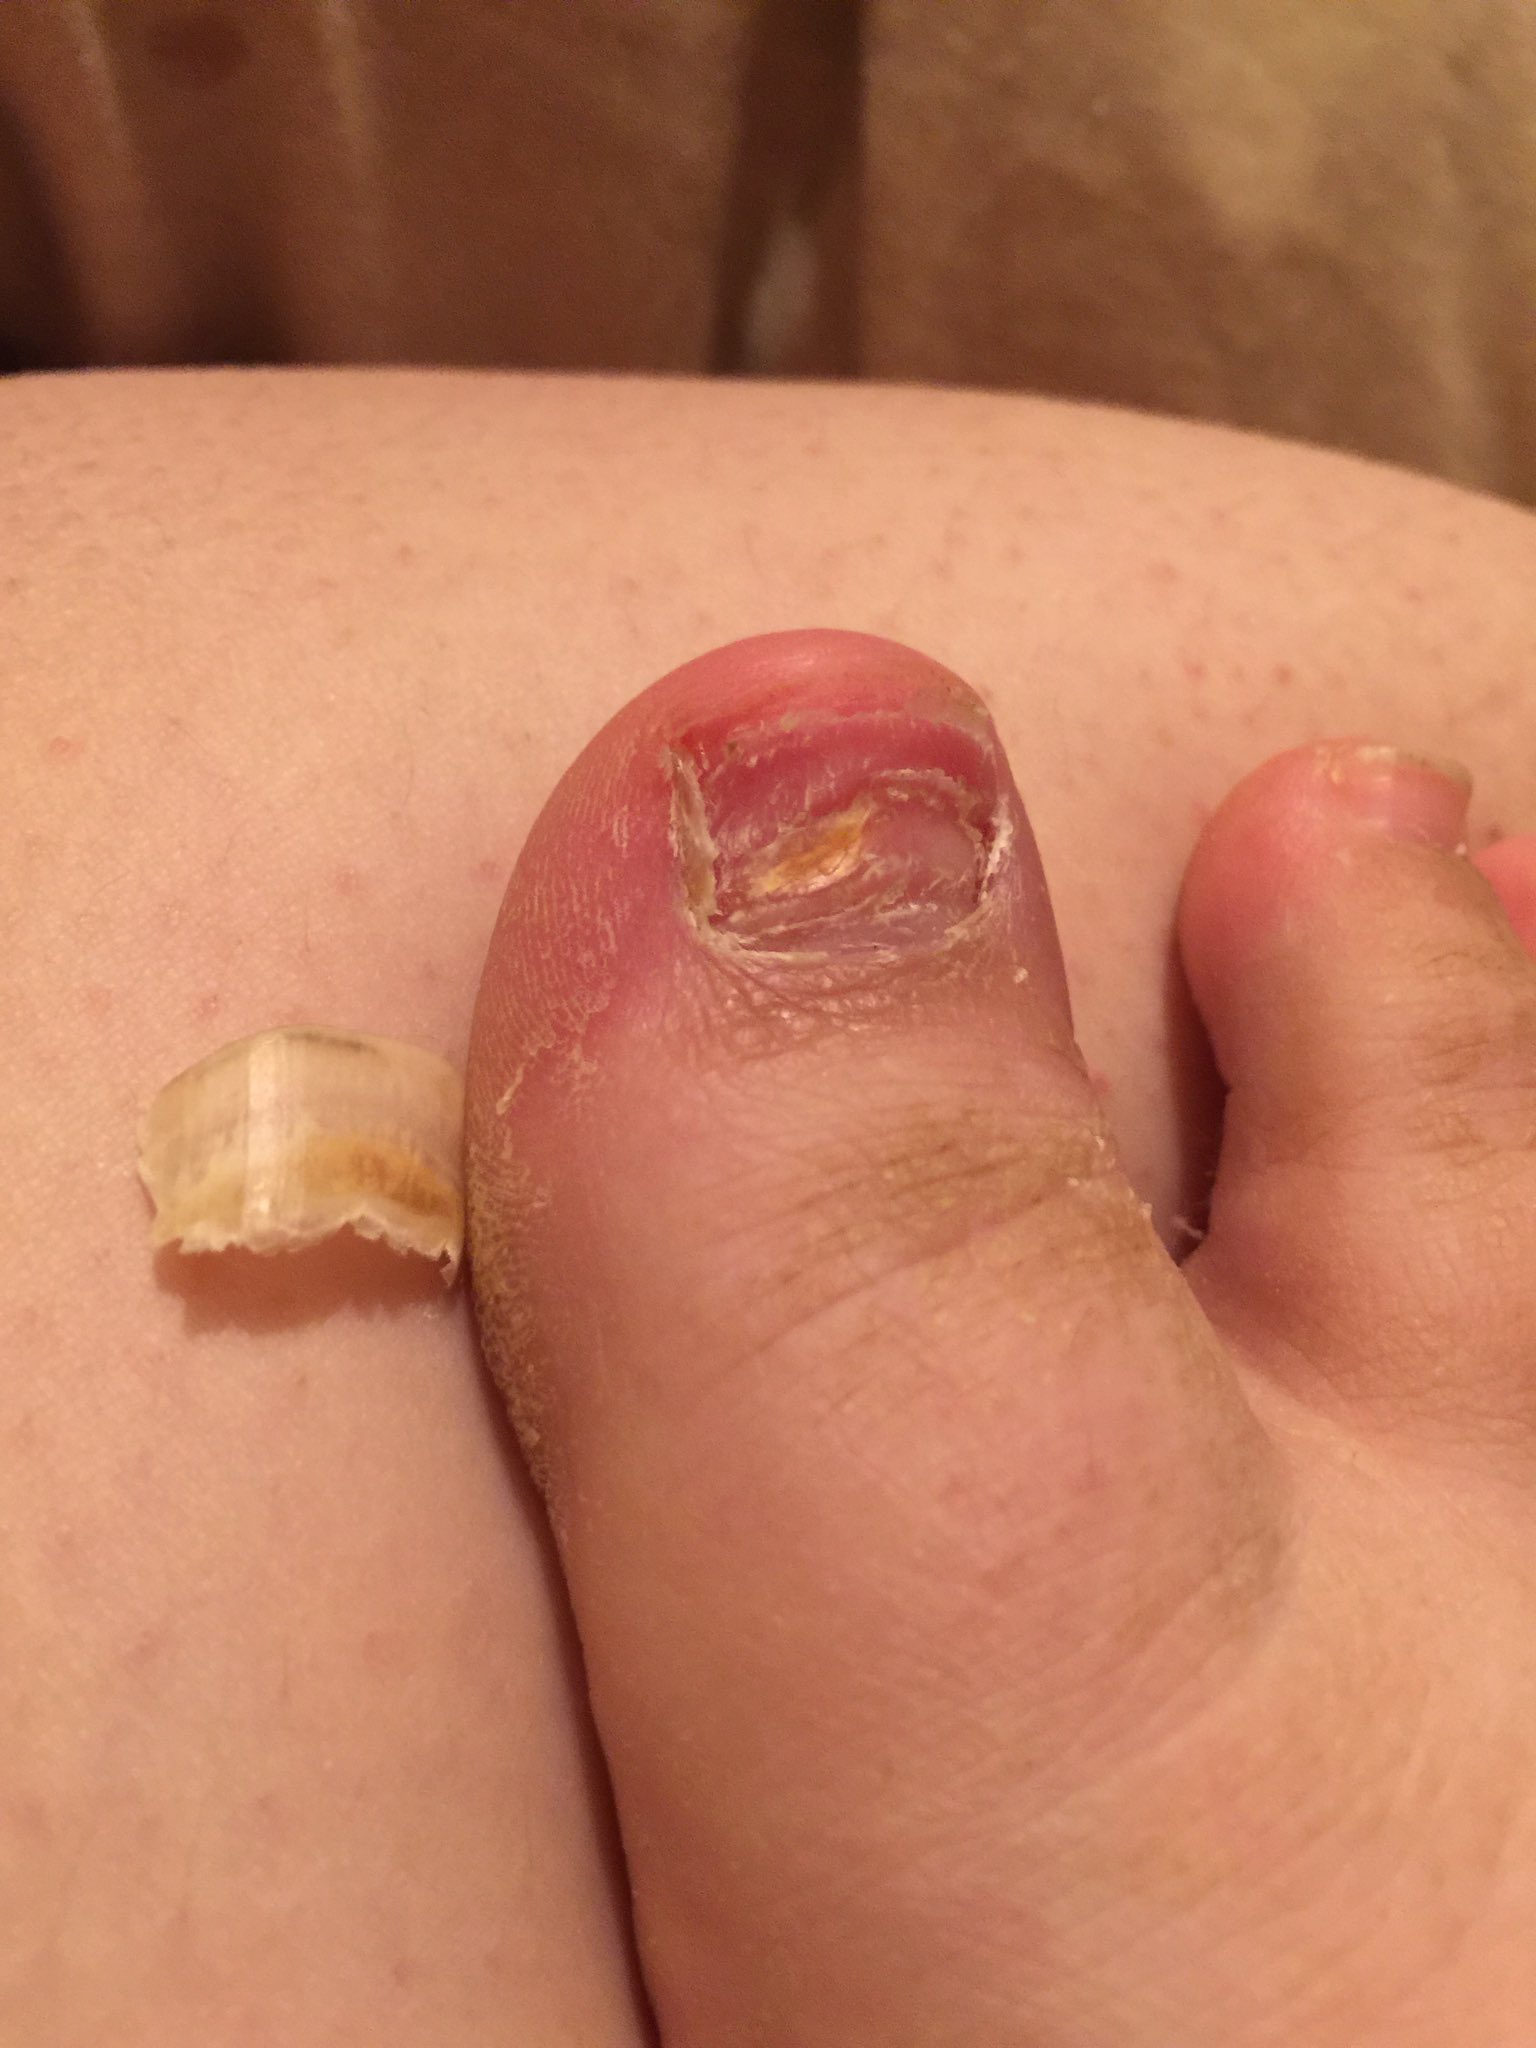 How To Remove Fake Dual Form Toenails ( Updated Version ) = GROSS - YouTube